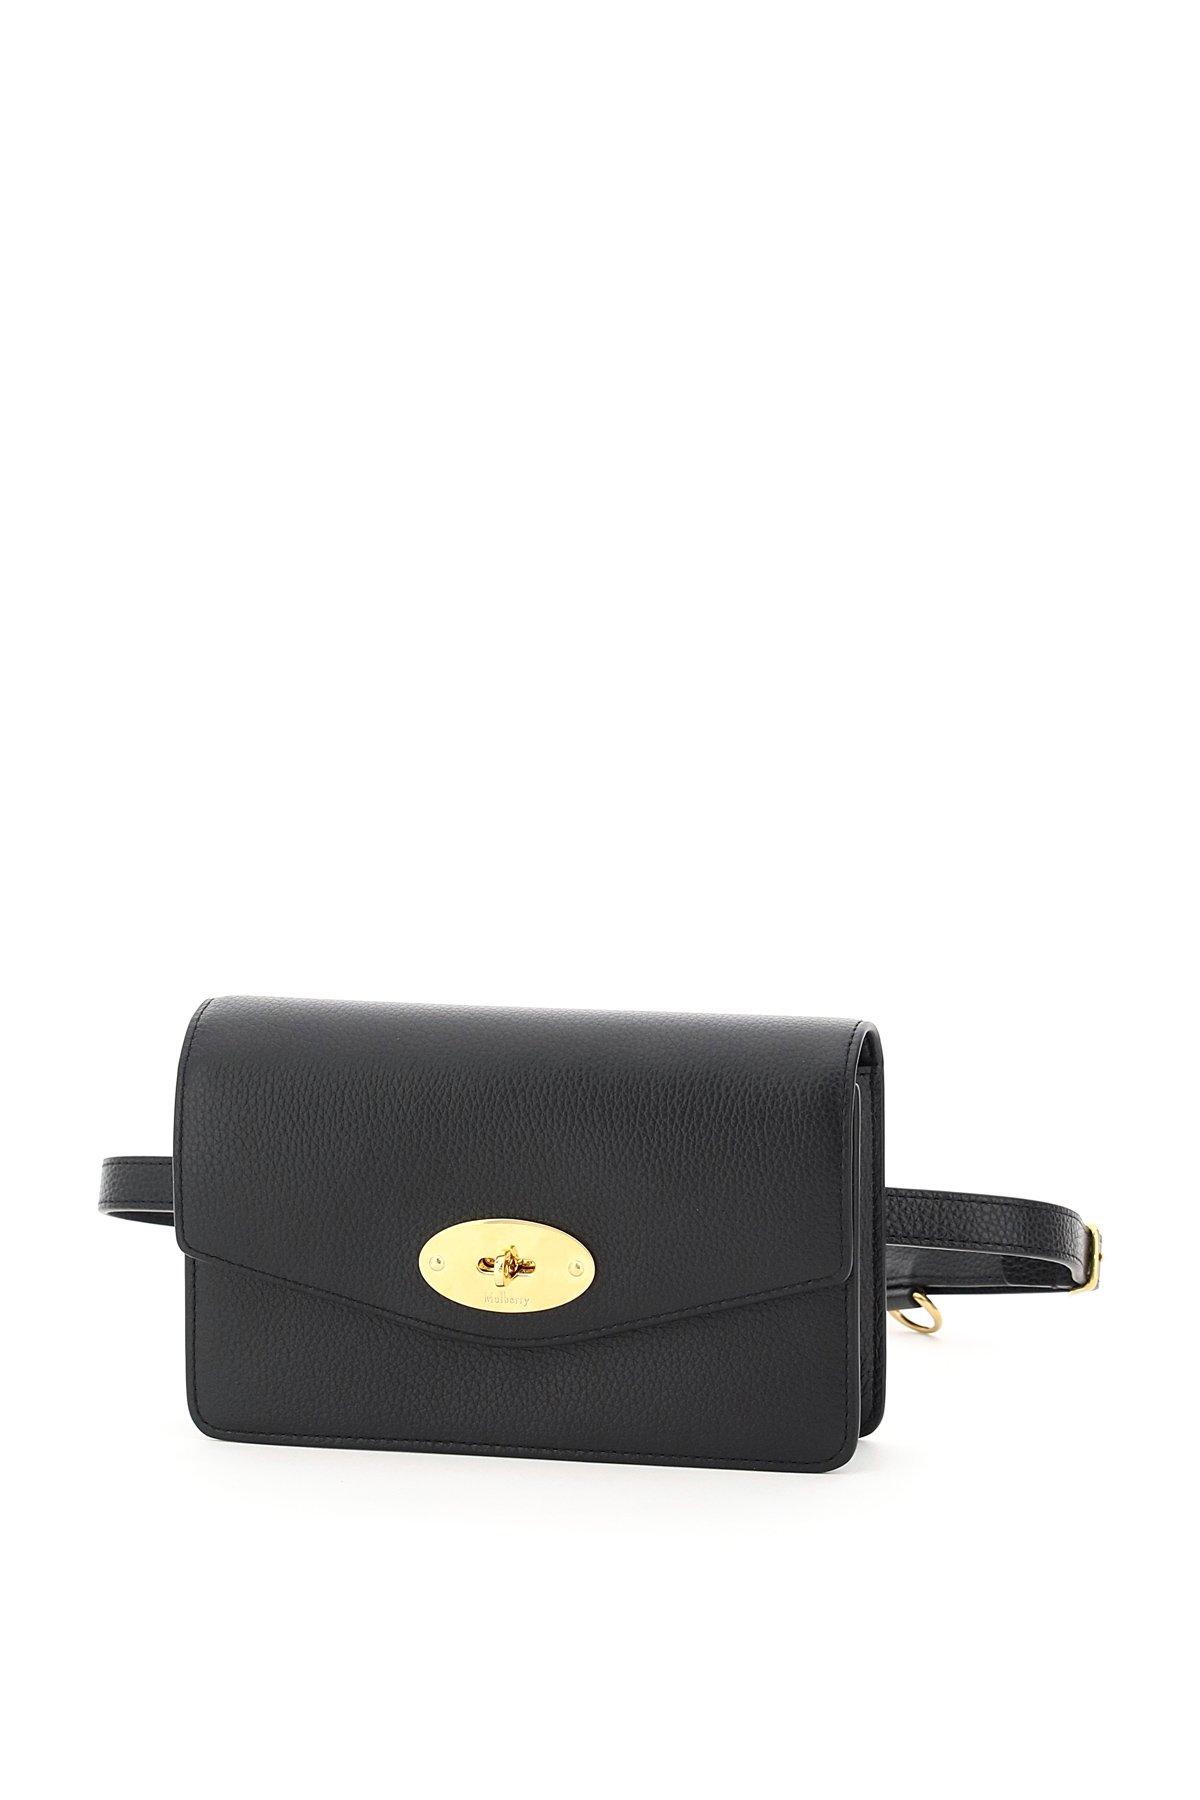 Mulberry Small Darley Leather Belt Bag in Black | Lyst